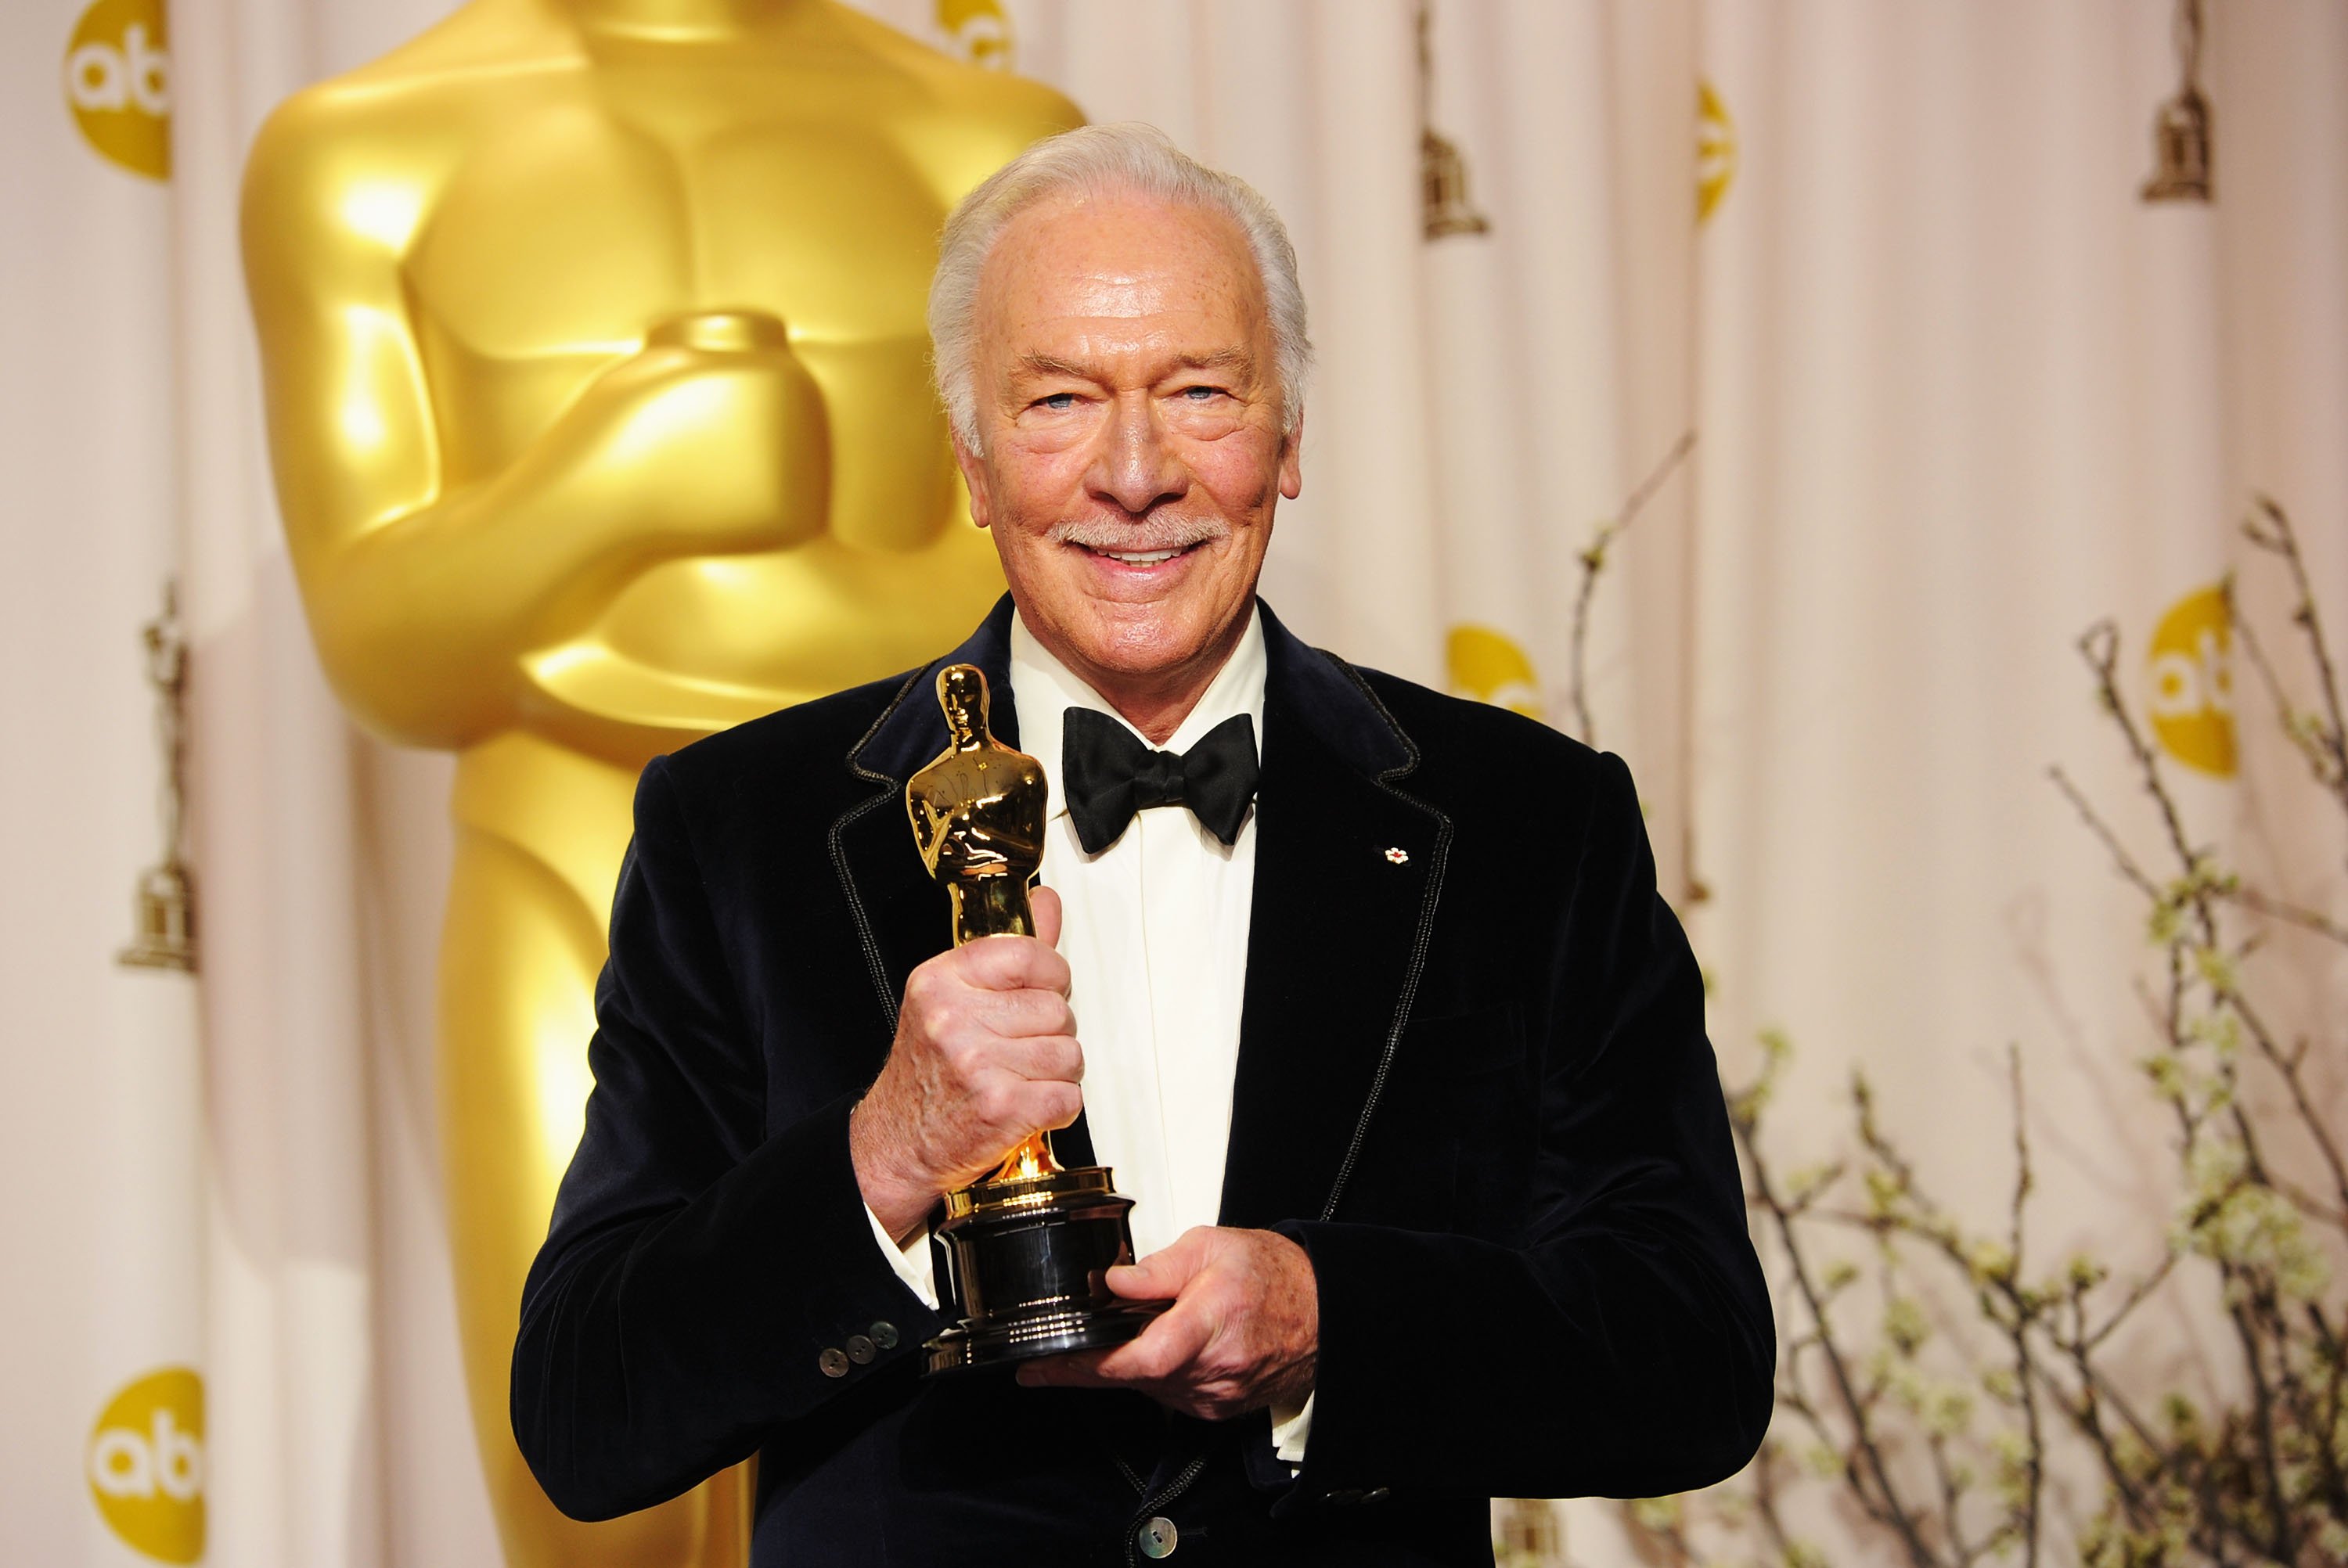 Christopher Plummer poses in the press room at the 84th Annual Academy Awards held at the Hollywood & Highland Center on February 26, 2012, in Hollywood, California | Source: Getty Images